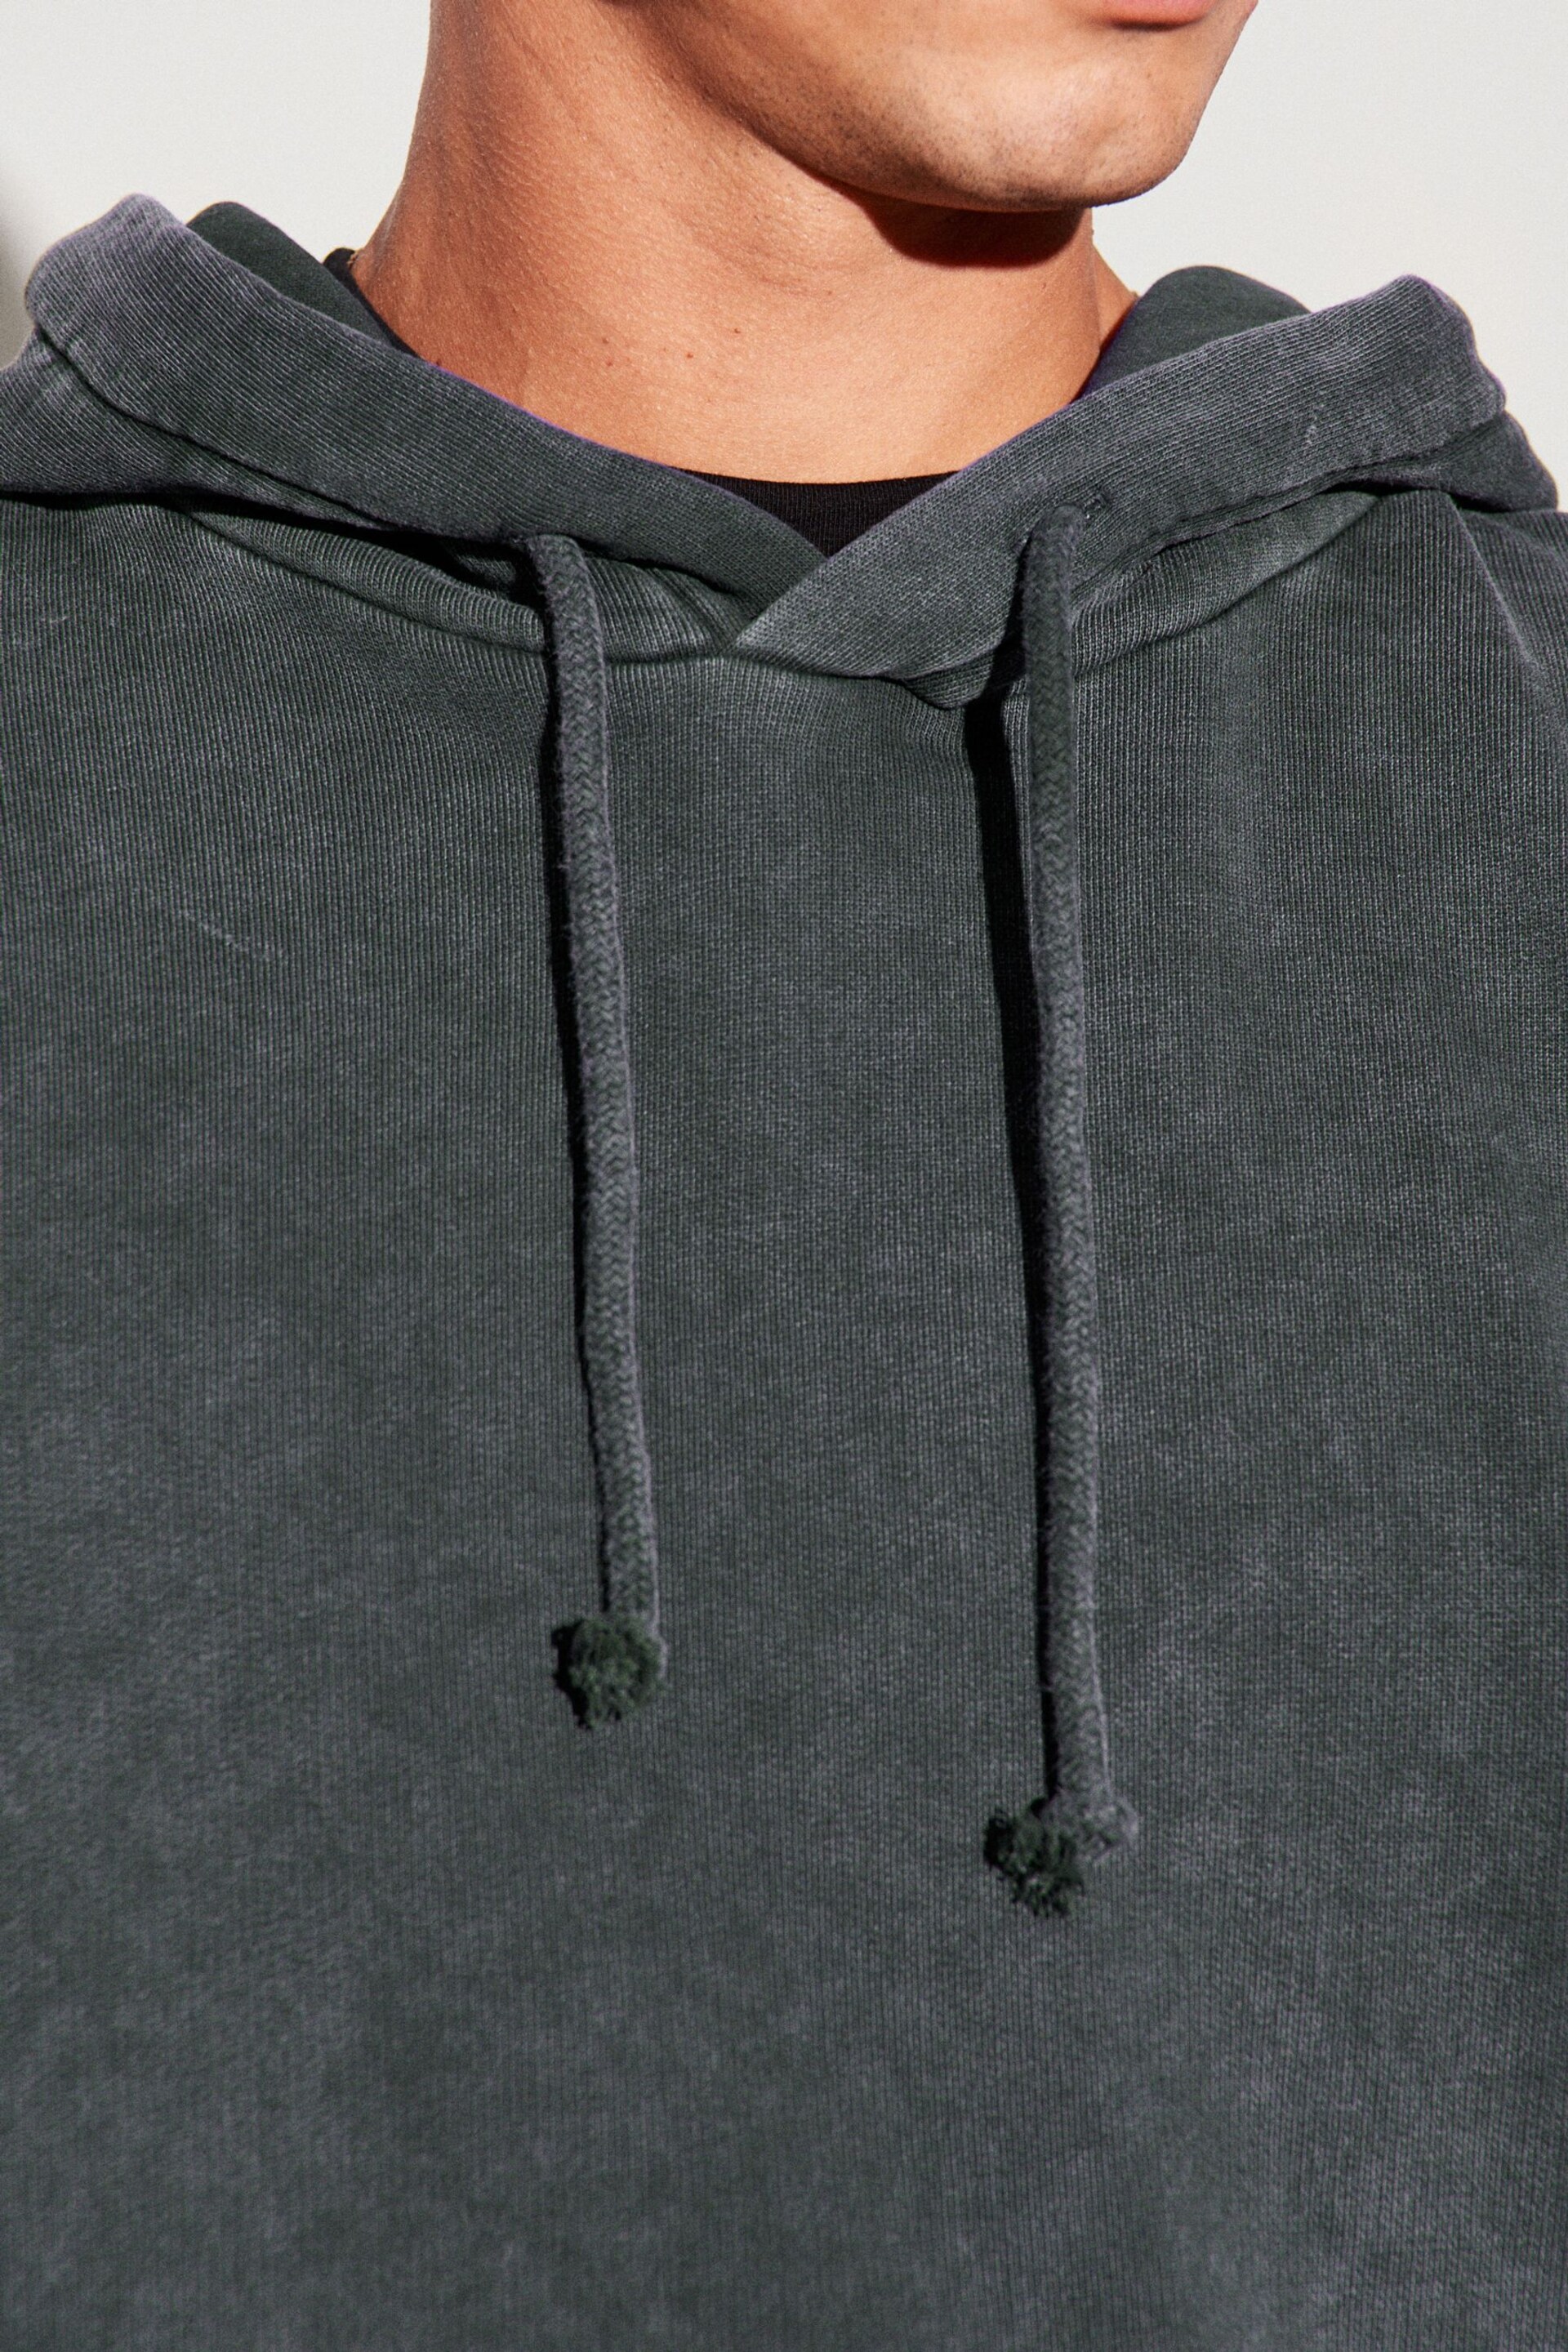 Charcoal Grey Garment Washed Hoodie - Image 4 of 8